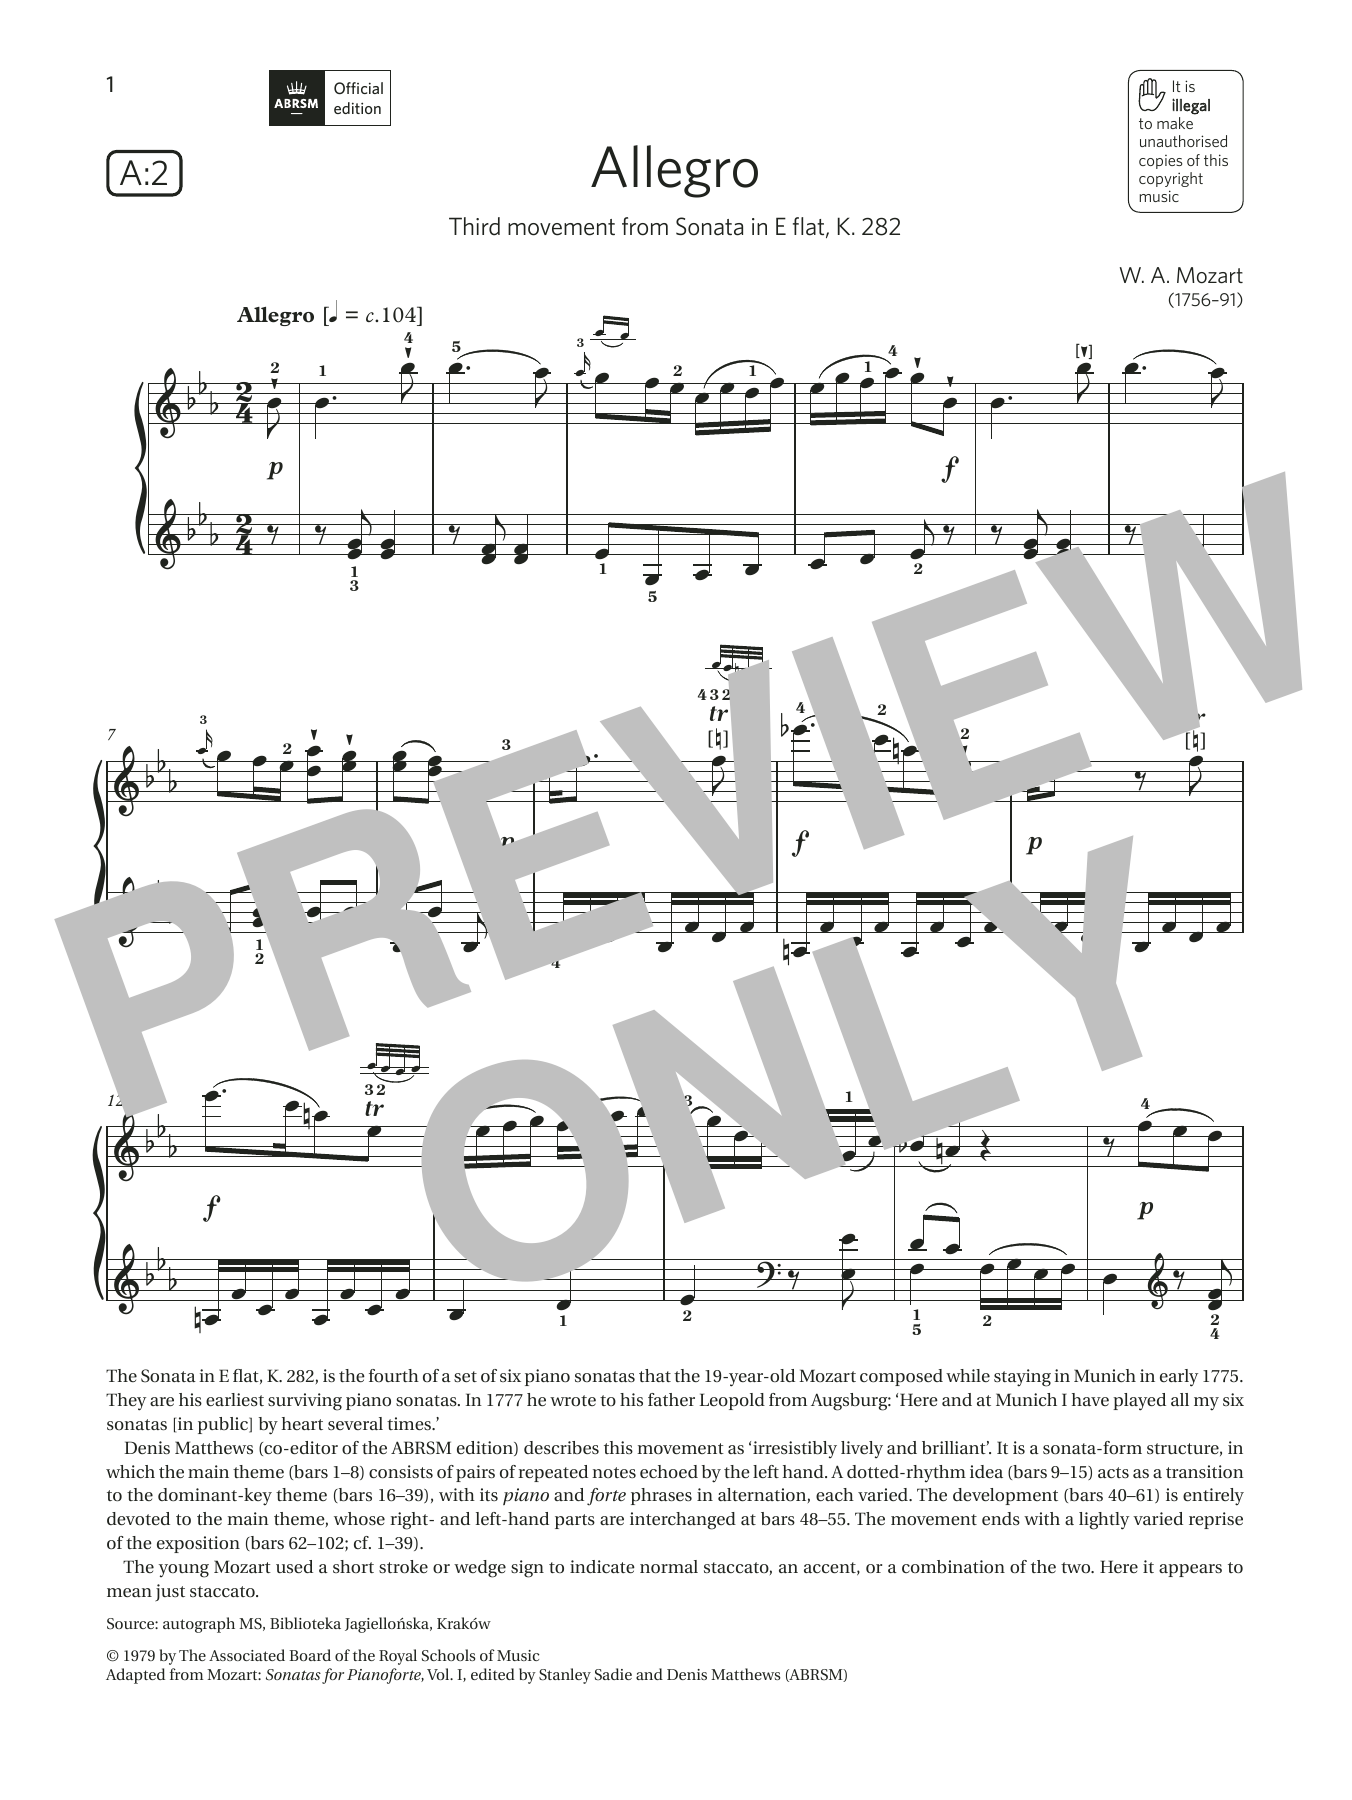 Download W. A. Mozart Allegro (Grade 6, list A2, from the ABR Sheet Music